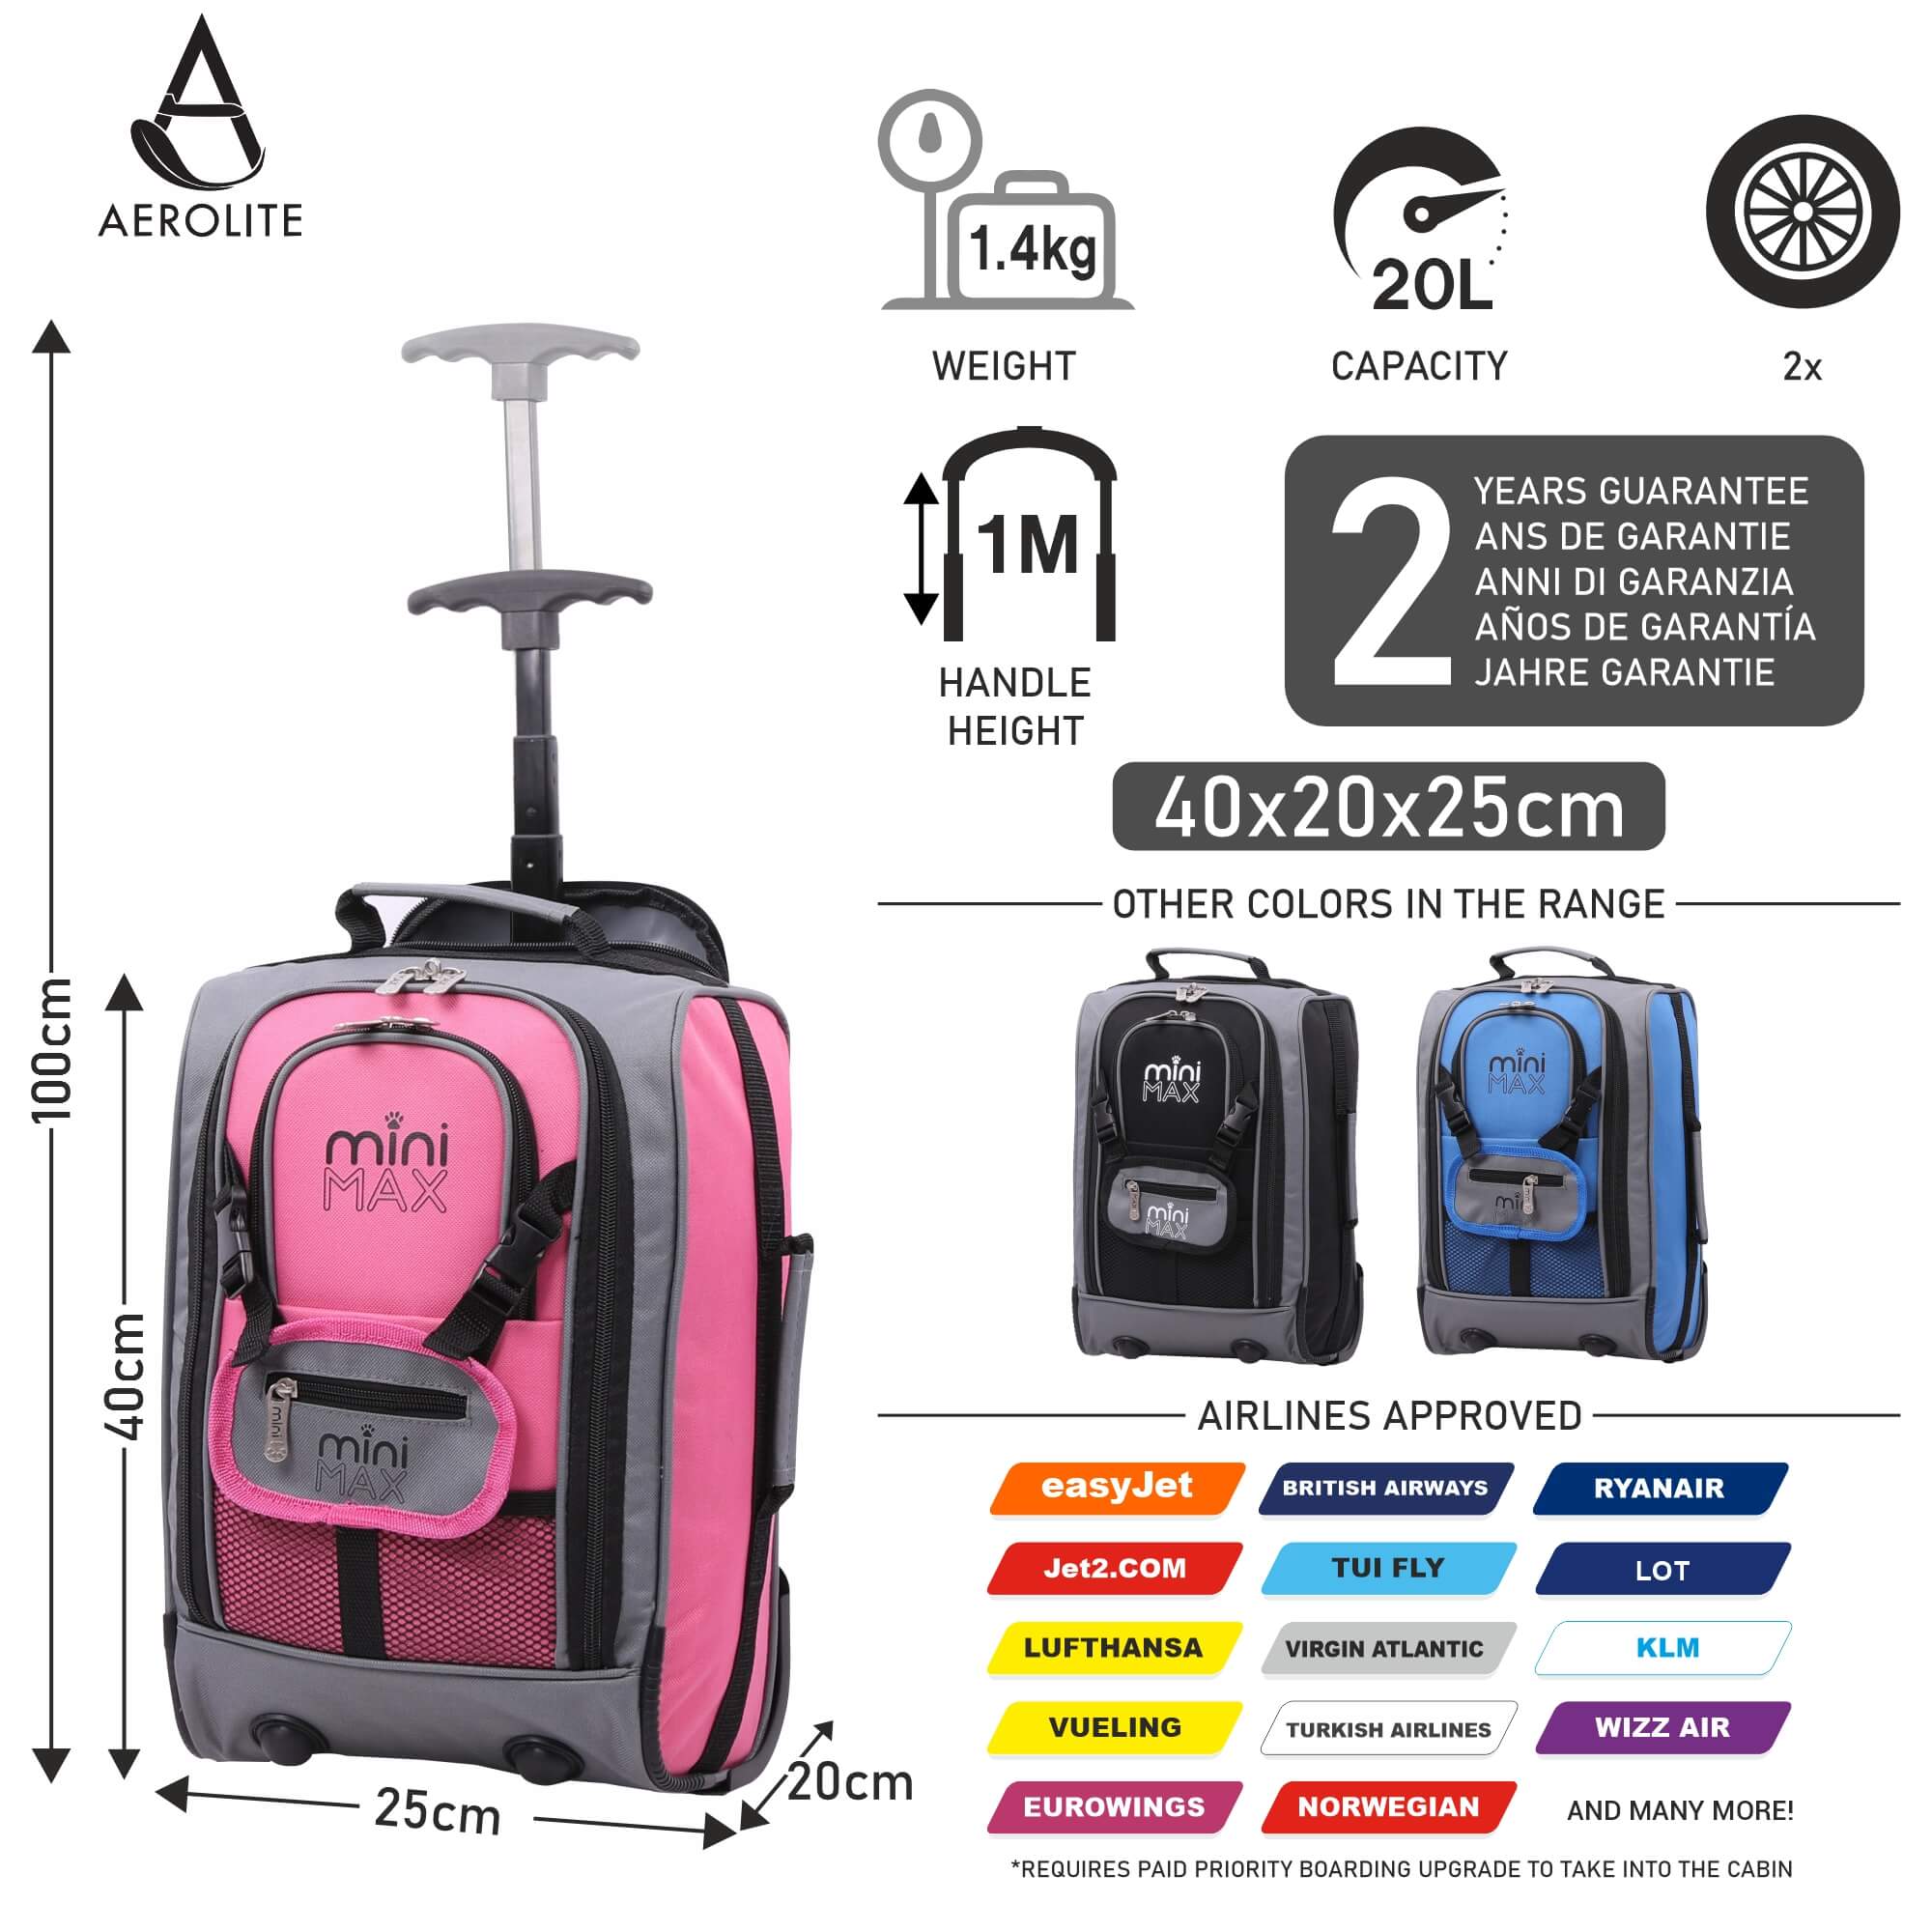 Aerolite MiniMax Ryanair Maximum 40x20x25cm Size Cabin Hand Luggage, 20L Under Seat Trolley Backpack, Carry On Cabin Hand Luggage with 2 Year Warranty